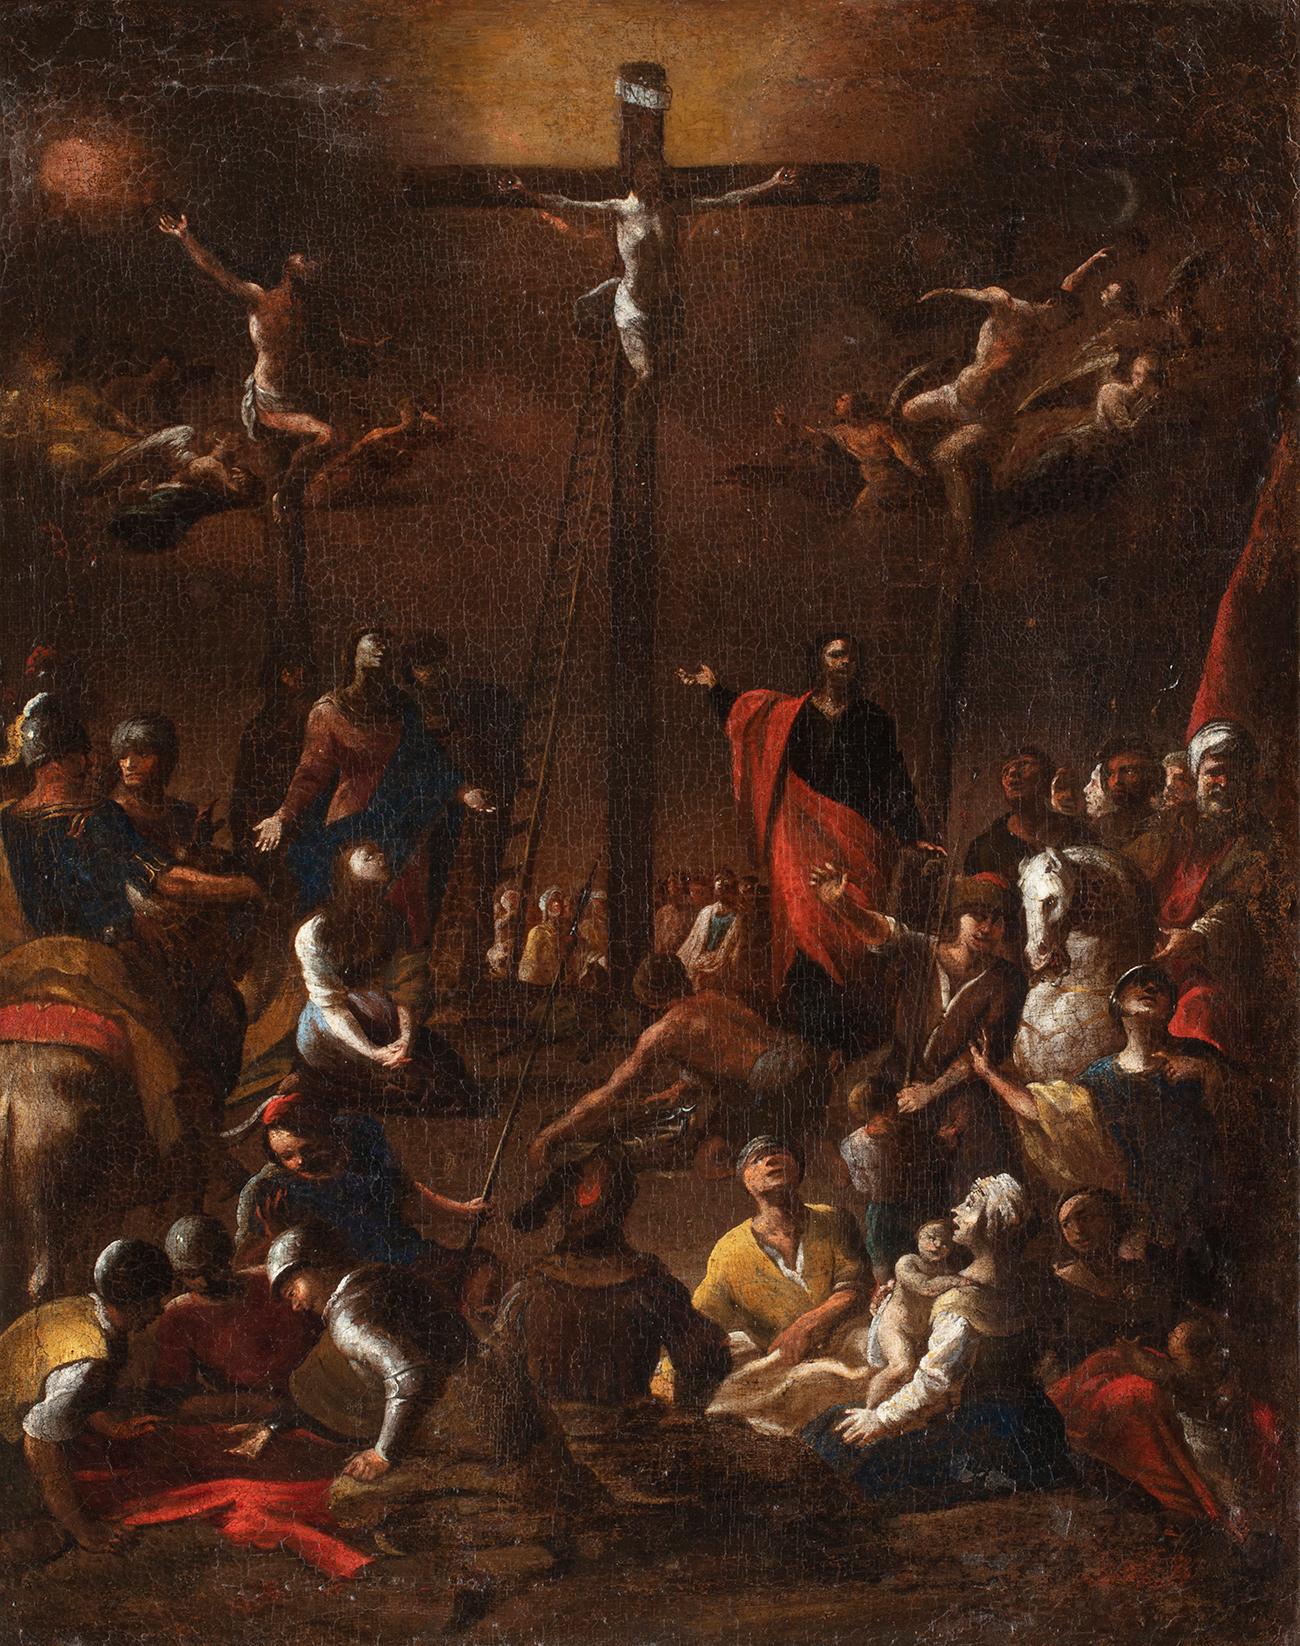 Scipione Compagno (active in Naples in XVII century)
Crucifixion 
Oil on canvas, cm. 64 x 52,5 - with frame cm. 80 x 67
Antique wooden cassetta frame carved, sculpted and gilded by Mecca technique  

Expertise: Nicola Spinosa 
Publications: